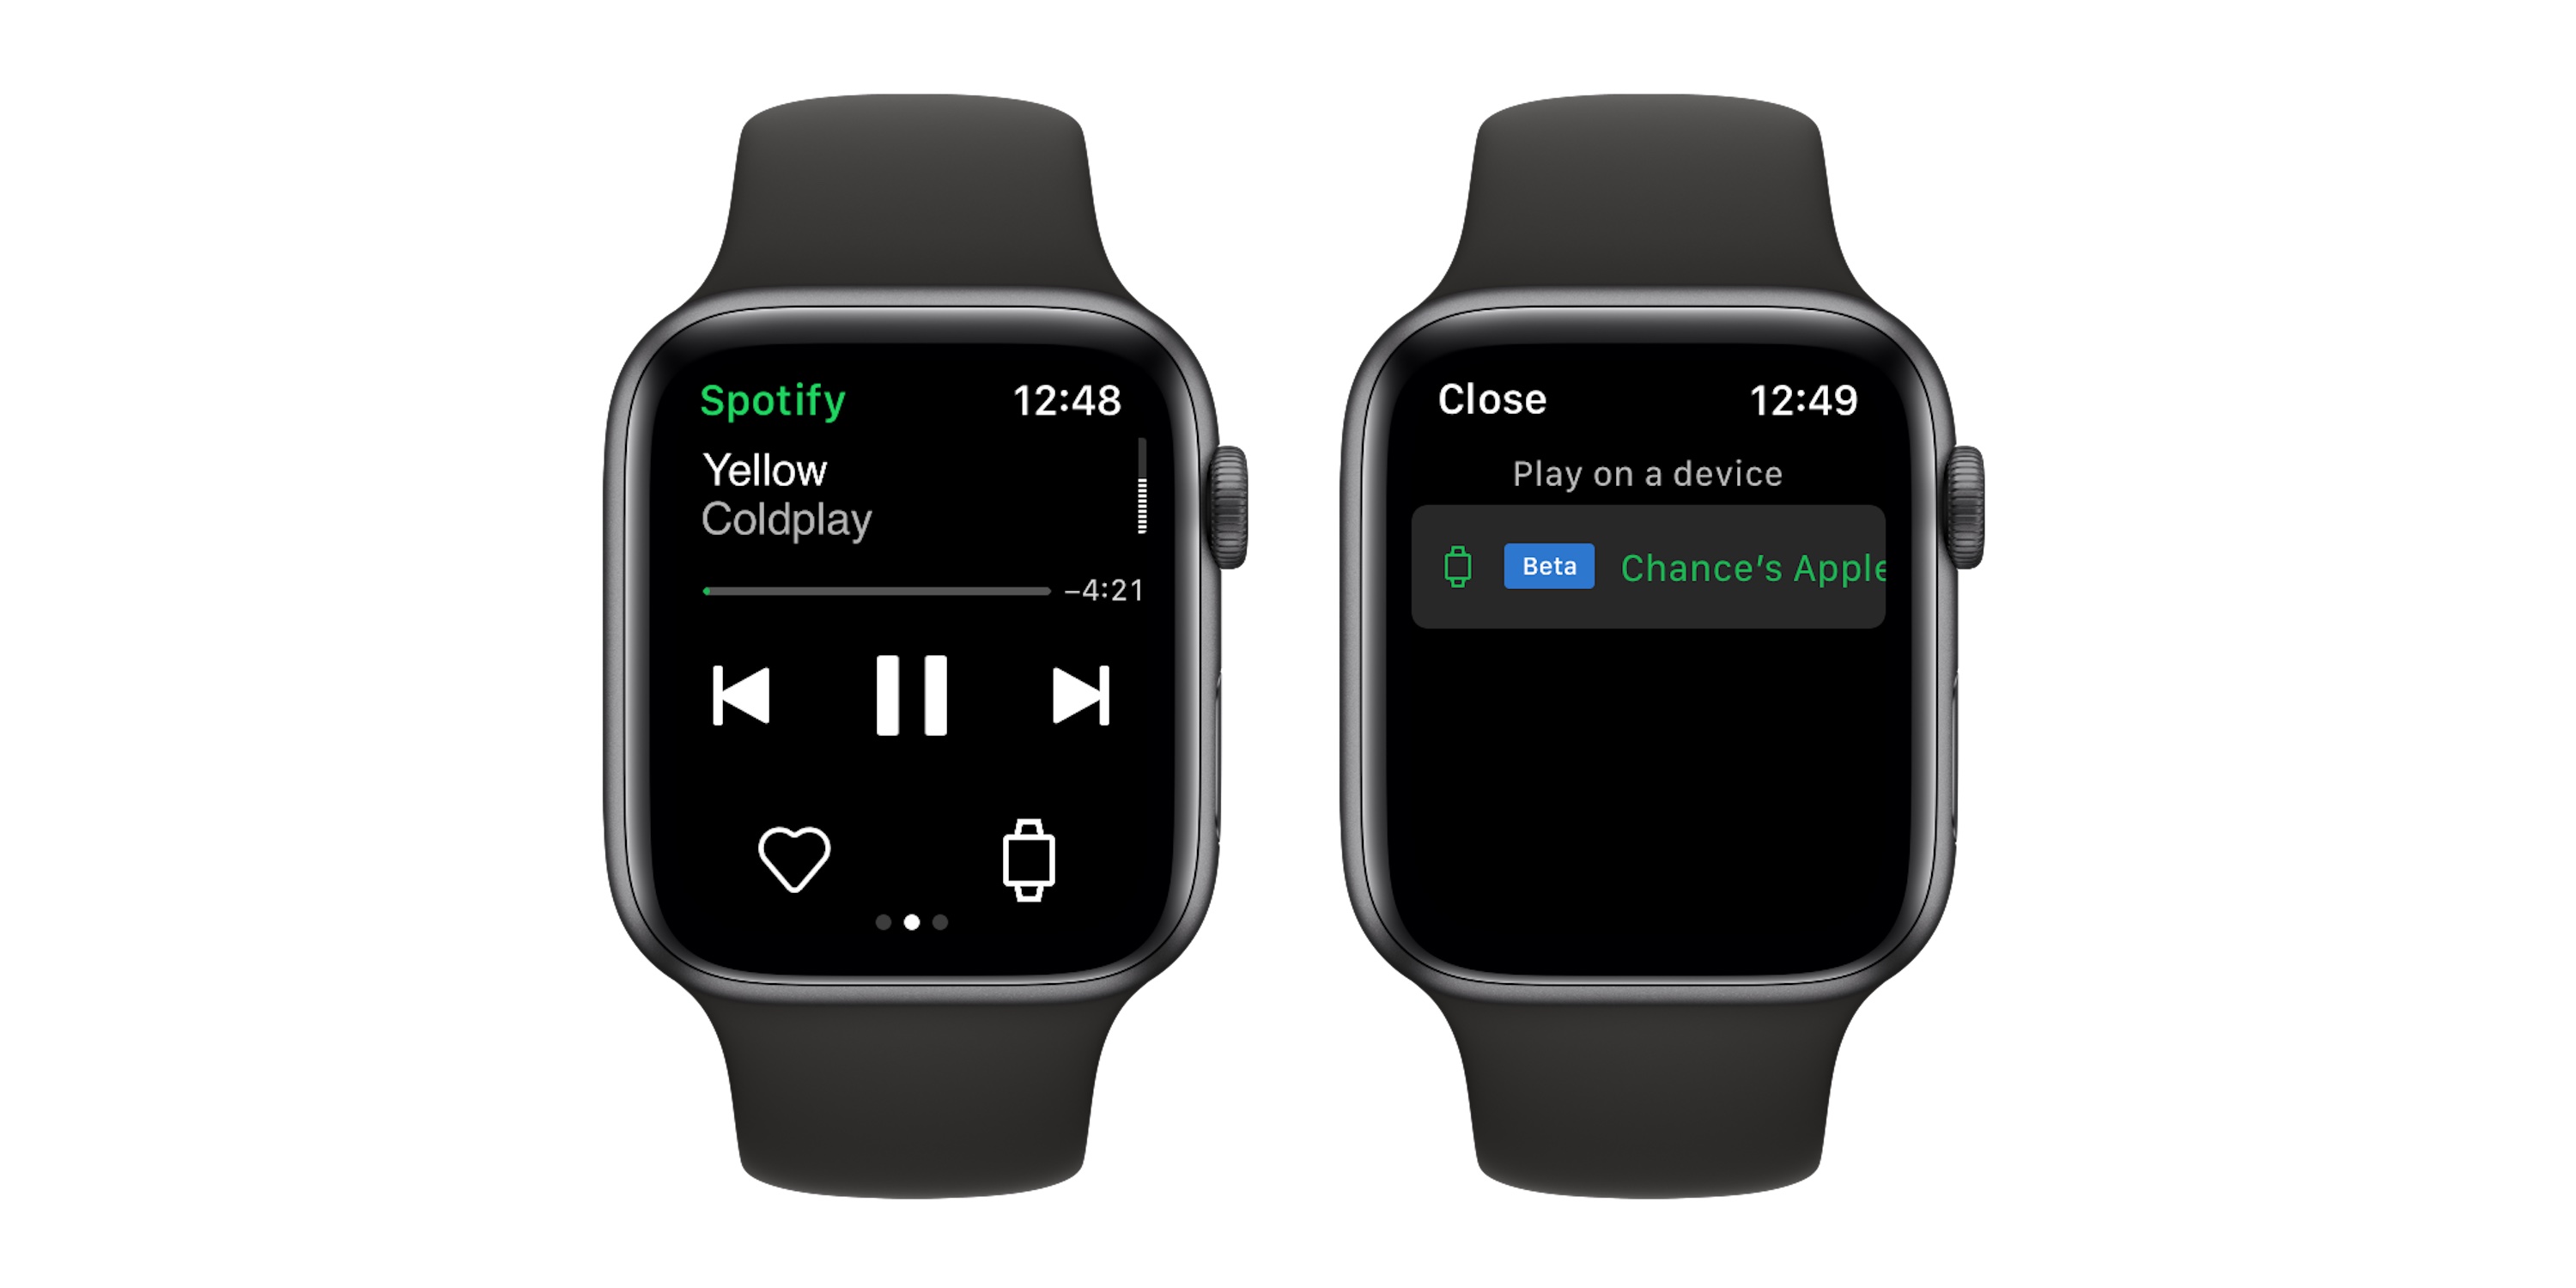 Wish Spotify streamed on Apple Watch? The time has arrived for many ...